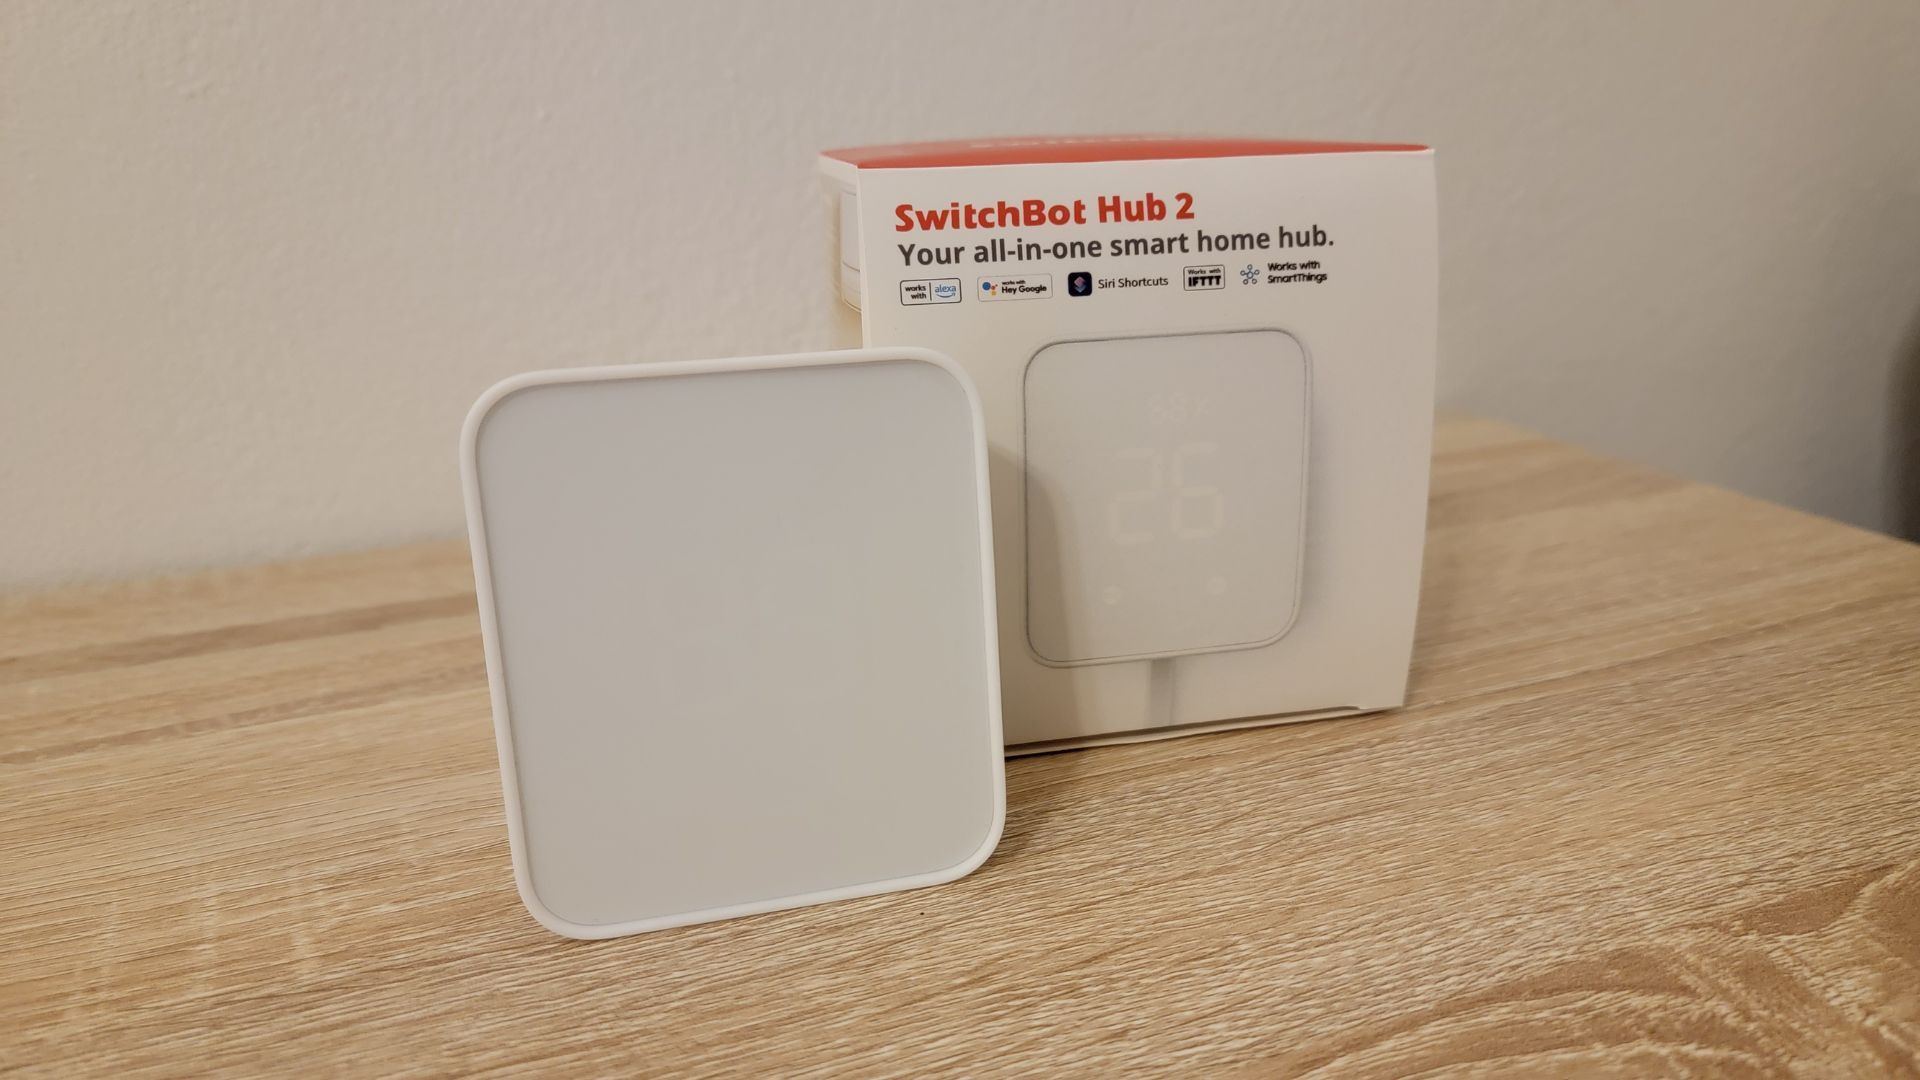 SwitchBot's Hub 2 is the first Matter device that really matters